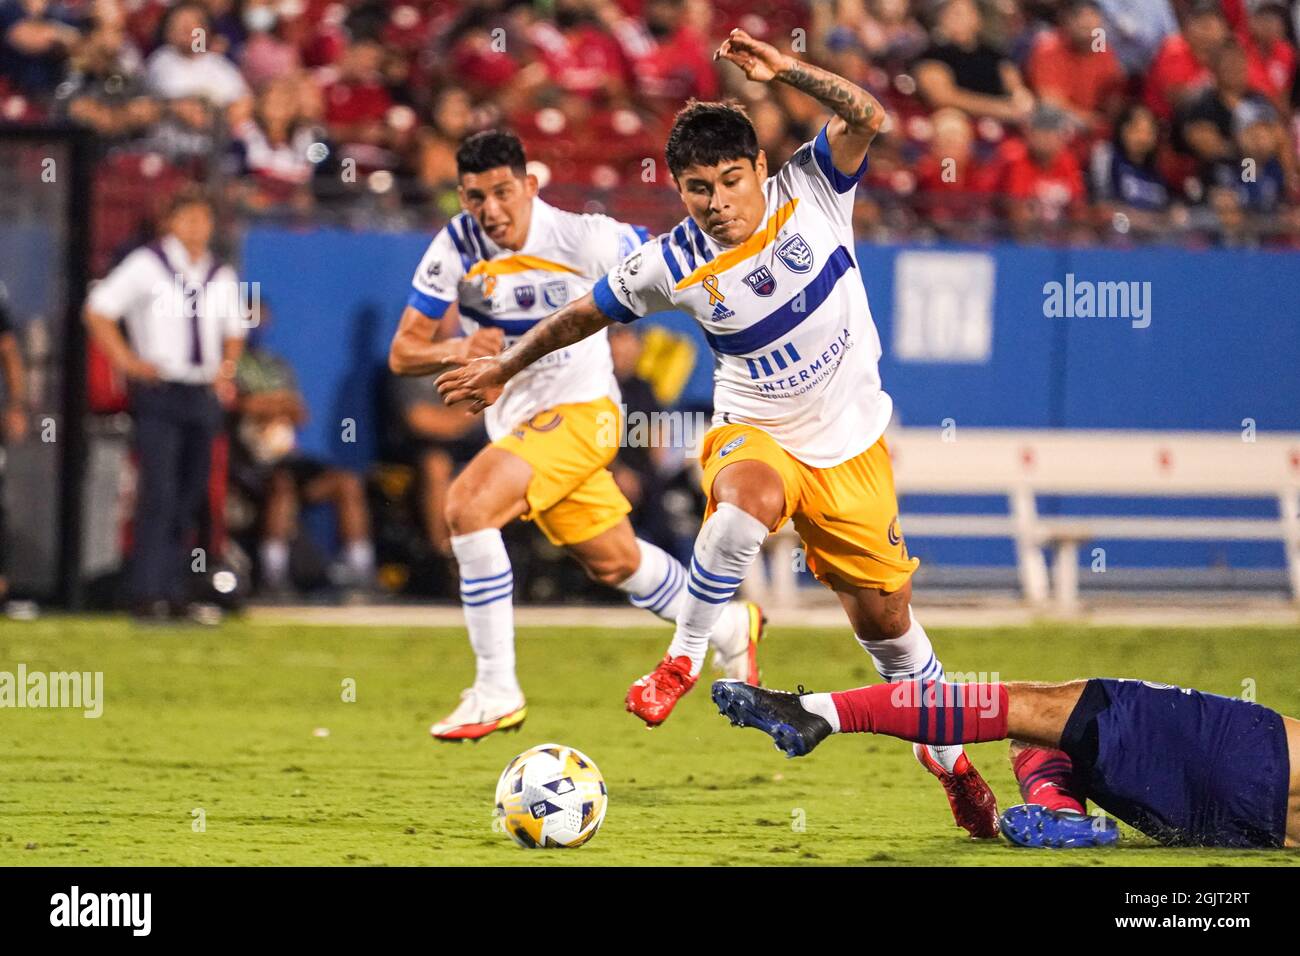 Dallas, Texas, USA, September 11, 2021,  San Jose Earthquakes Midfielder Javier López #9 avoids tackle during the match at Toyota Stadium.  (Photo Credit:  Marty Jean-Louis) Stock Photo